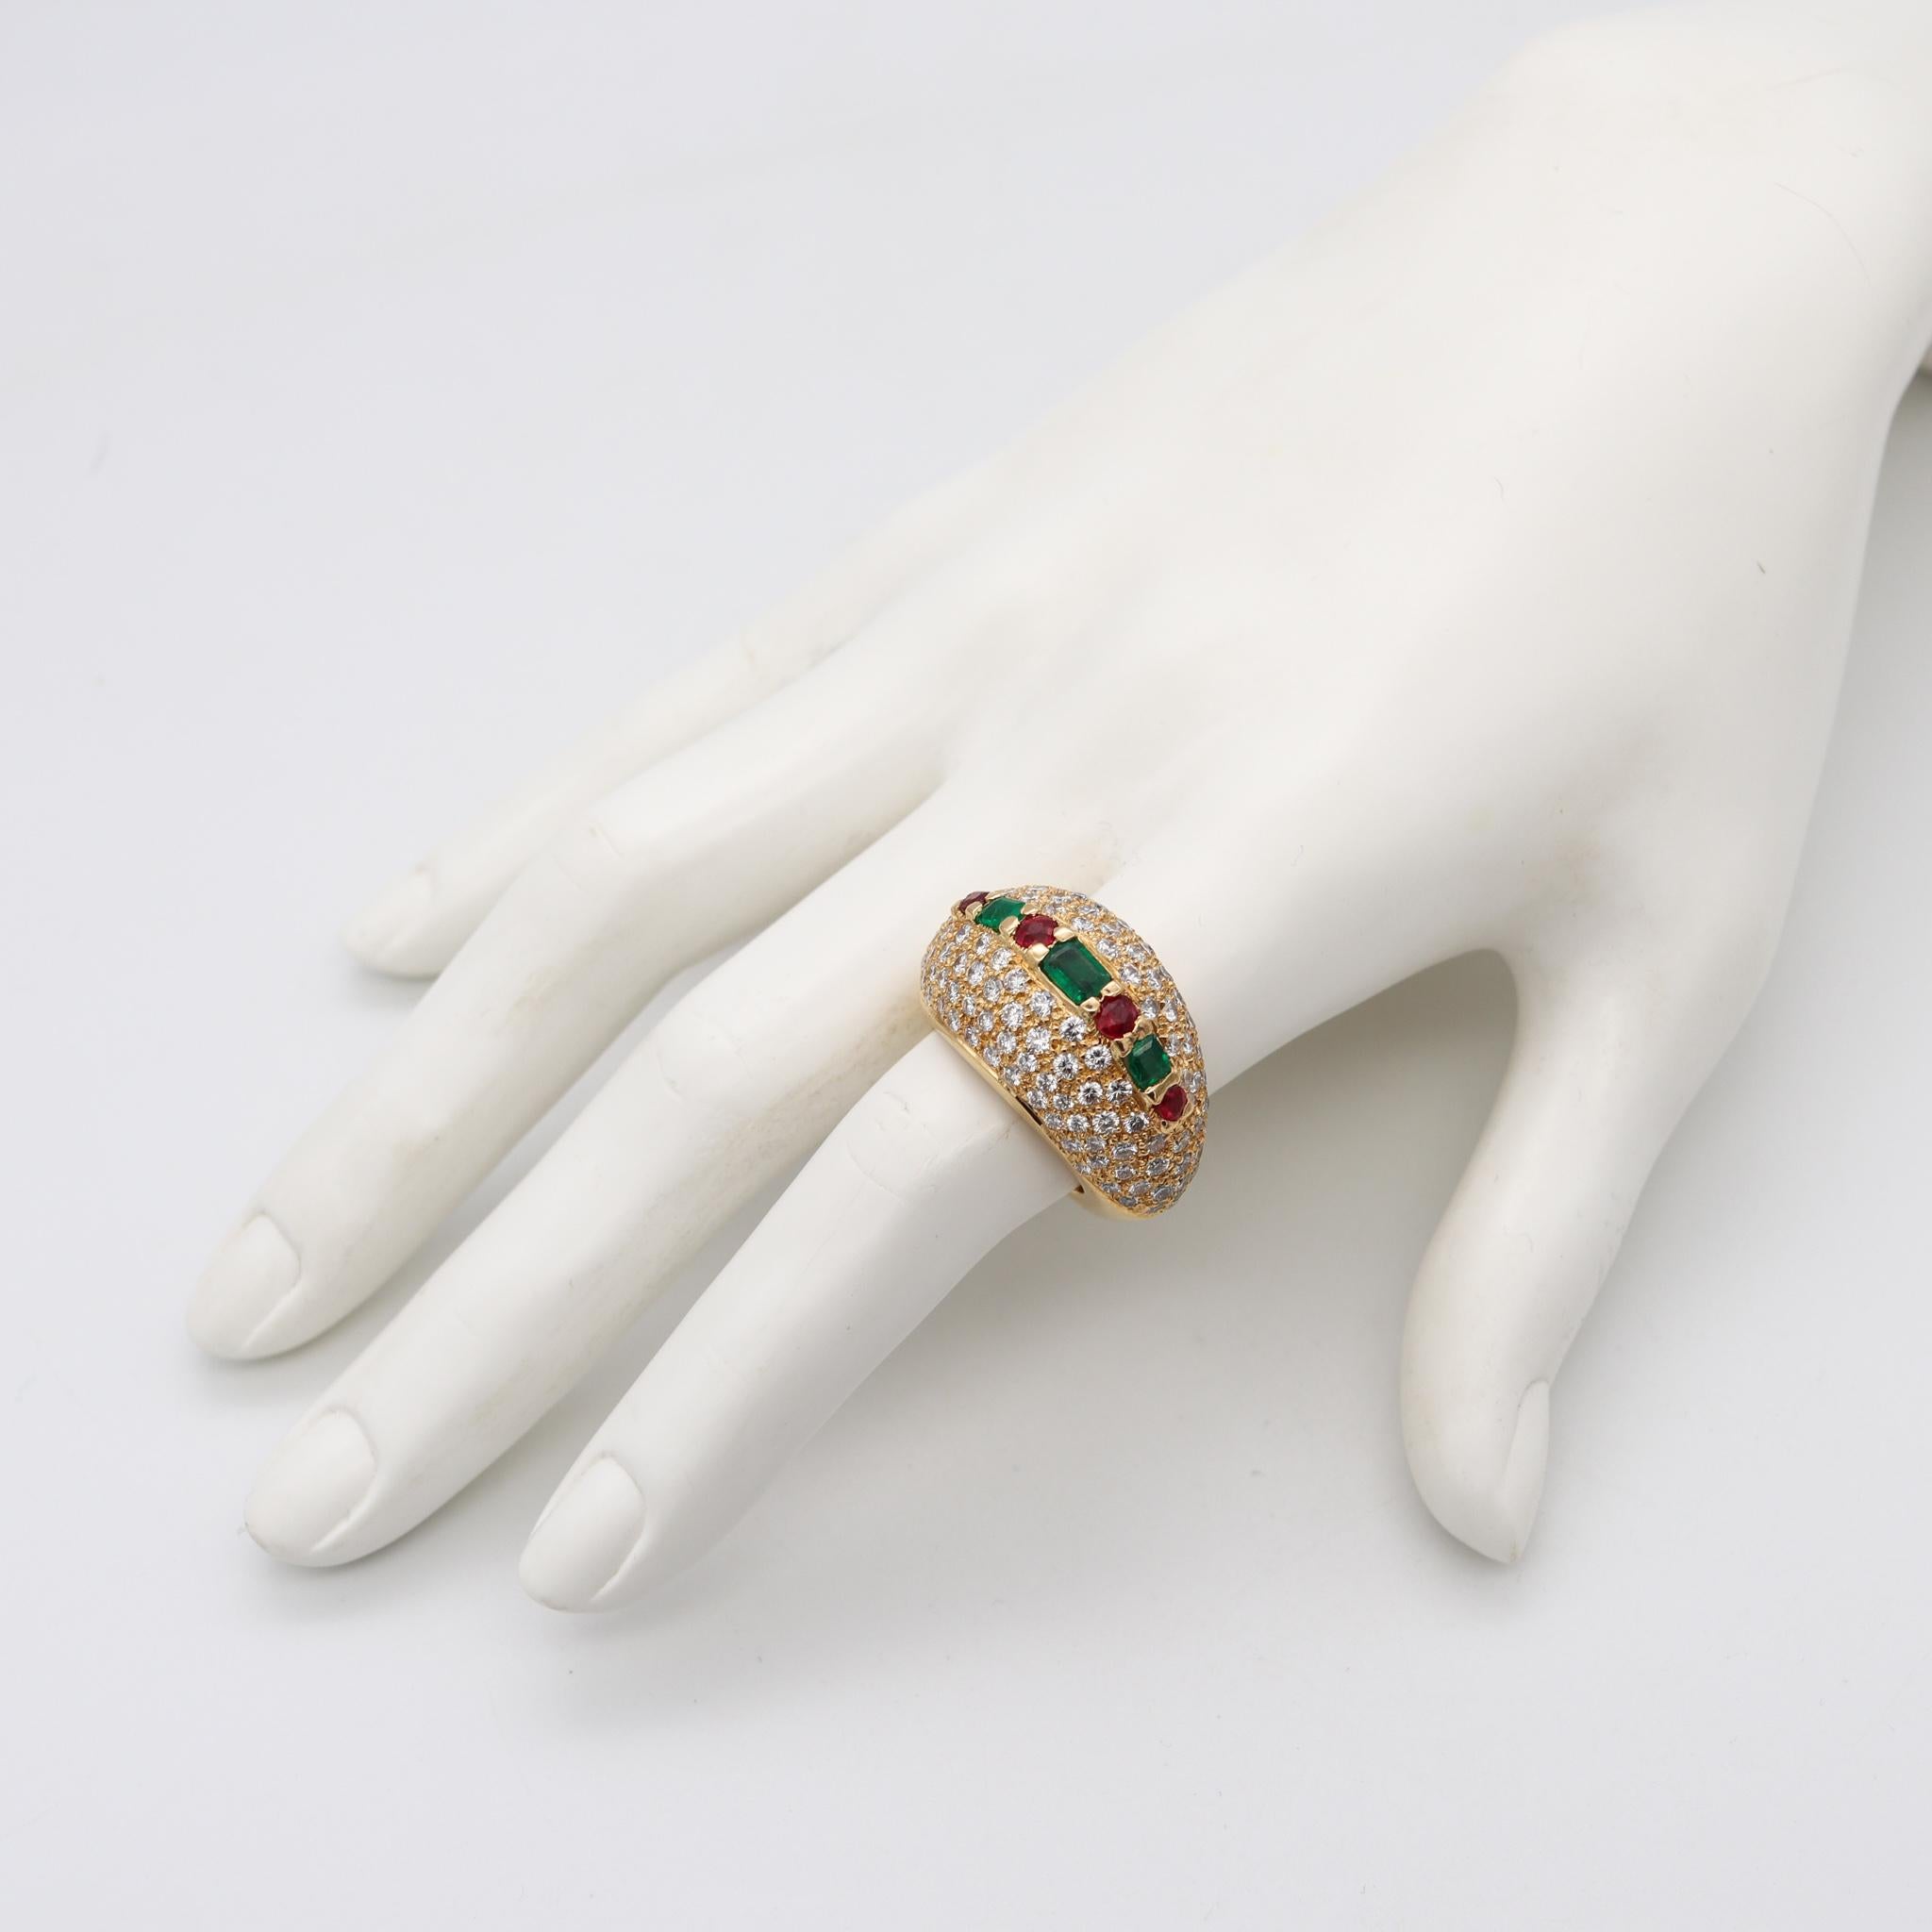 A French gem-set cocktail ring.

Fabulous bombe domed cocktail ring, made in France in the late 20th century. It was crafted with impeccable details in solid yellow gold of 18 karats, finished with high polish and embellished with a great selection